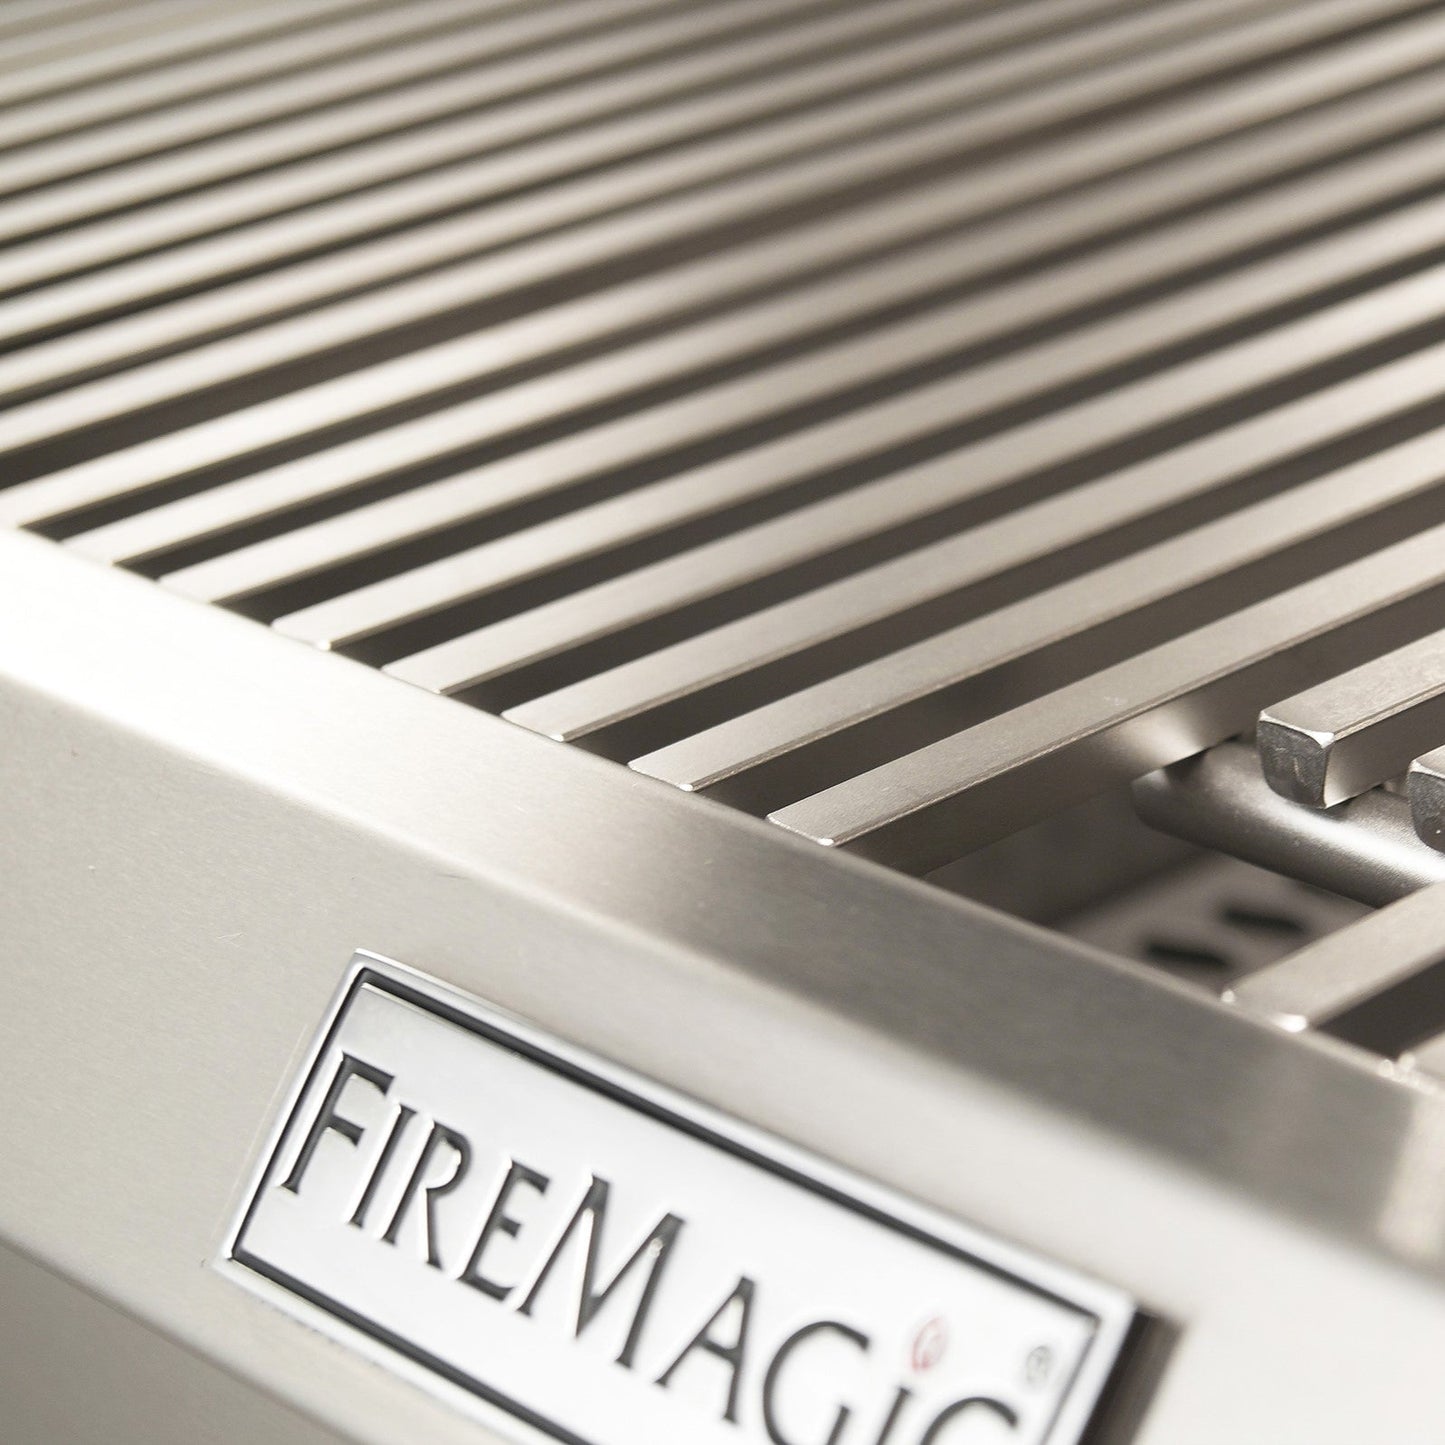 Firemagic 48 Inch Echelon Series Built-In Grill with Digital Thermometer - E1060i-9E1N